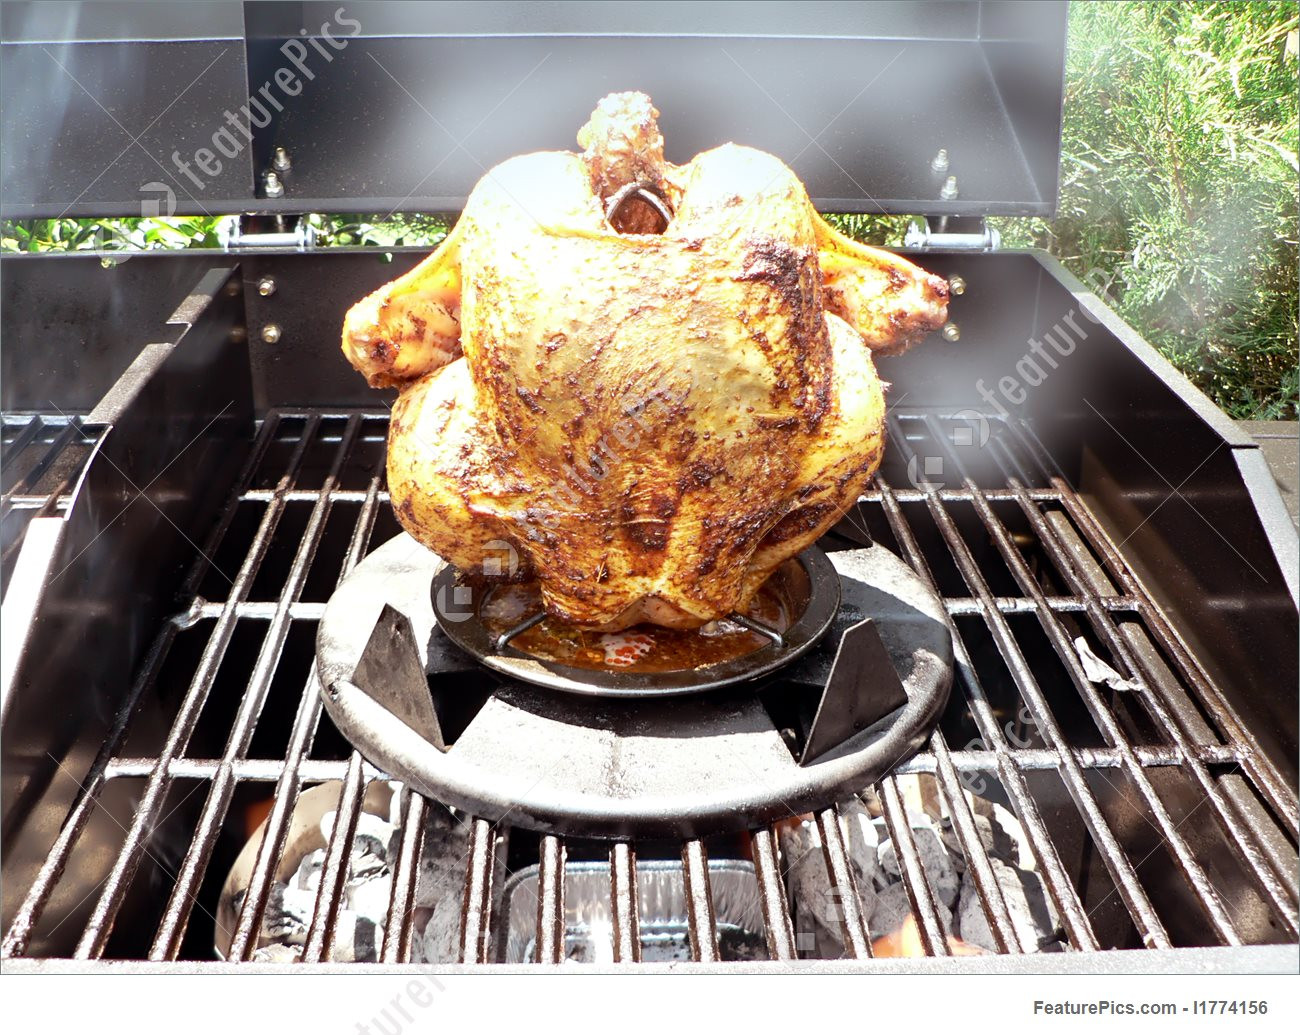 Whole Chicken On The Grill
 Meat Products Grilled Whole Chicken The Grill